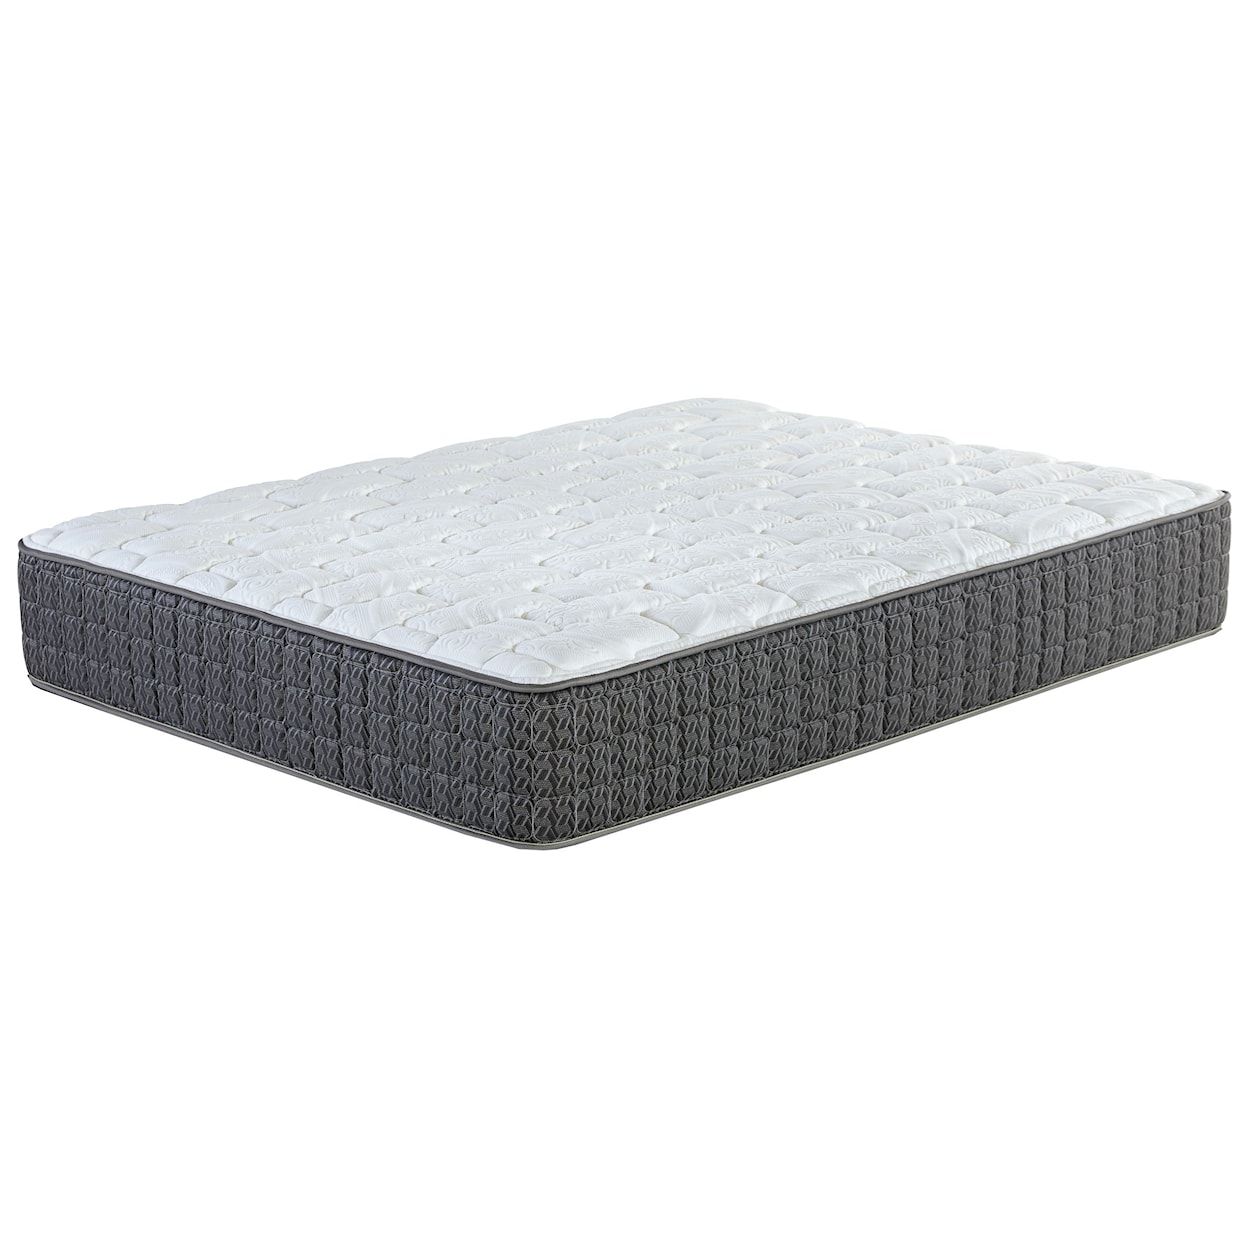 Corsicana Kinley Firm Twin Firm Pocketed Coil Mattress